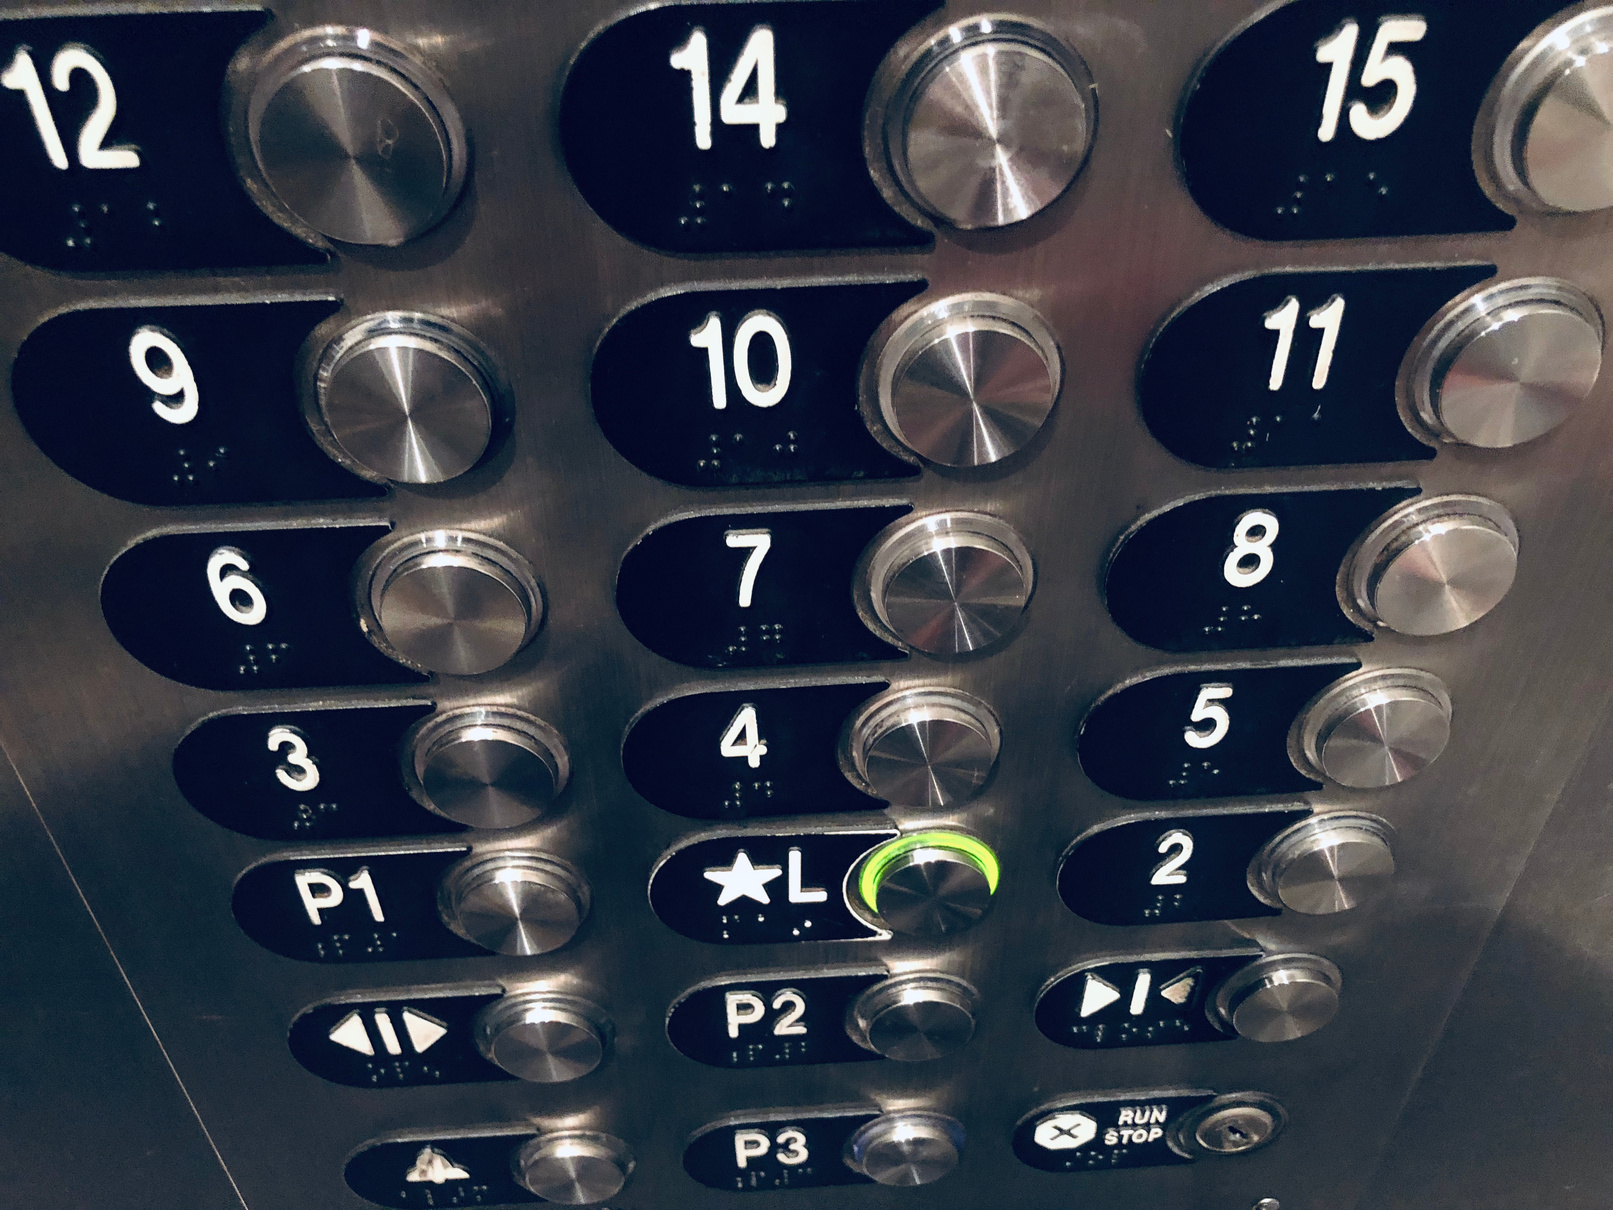 Elevator buttons panel with missing 13th floor number